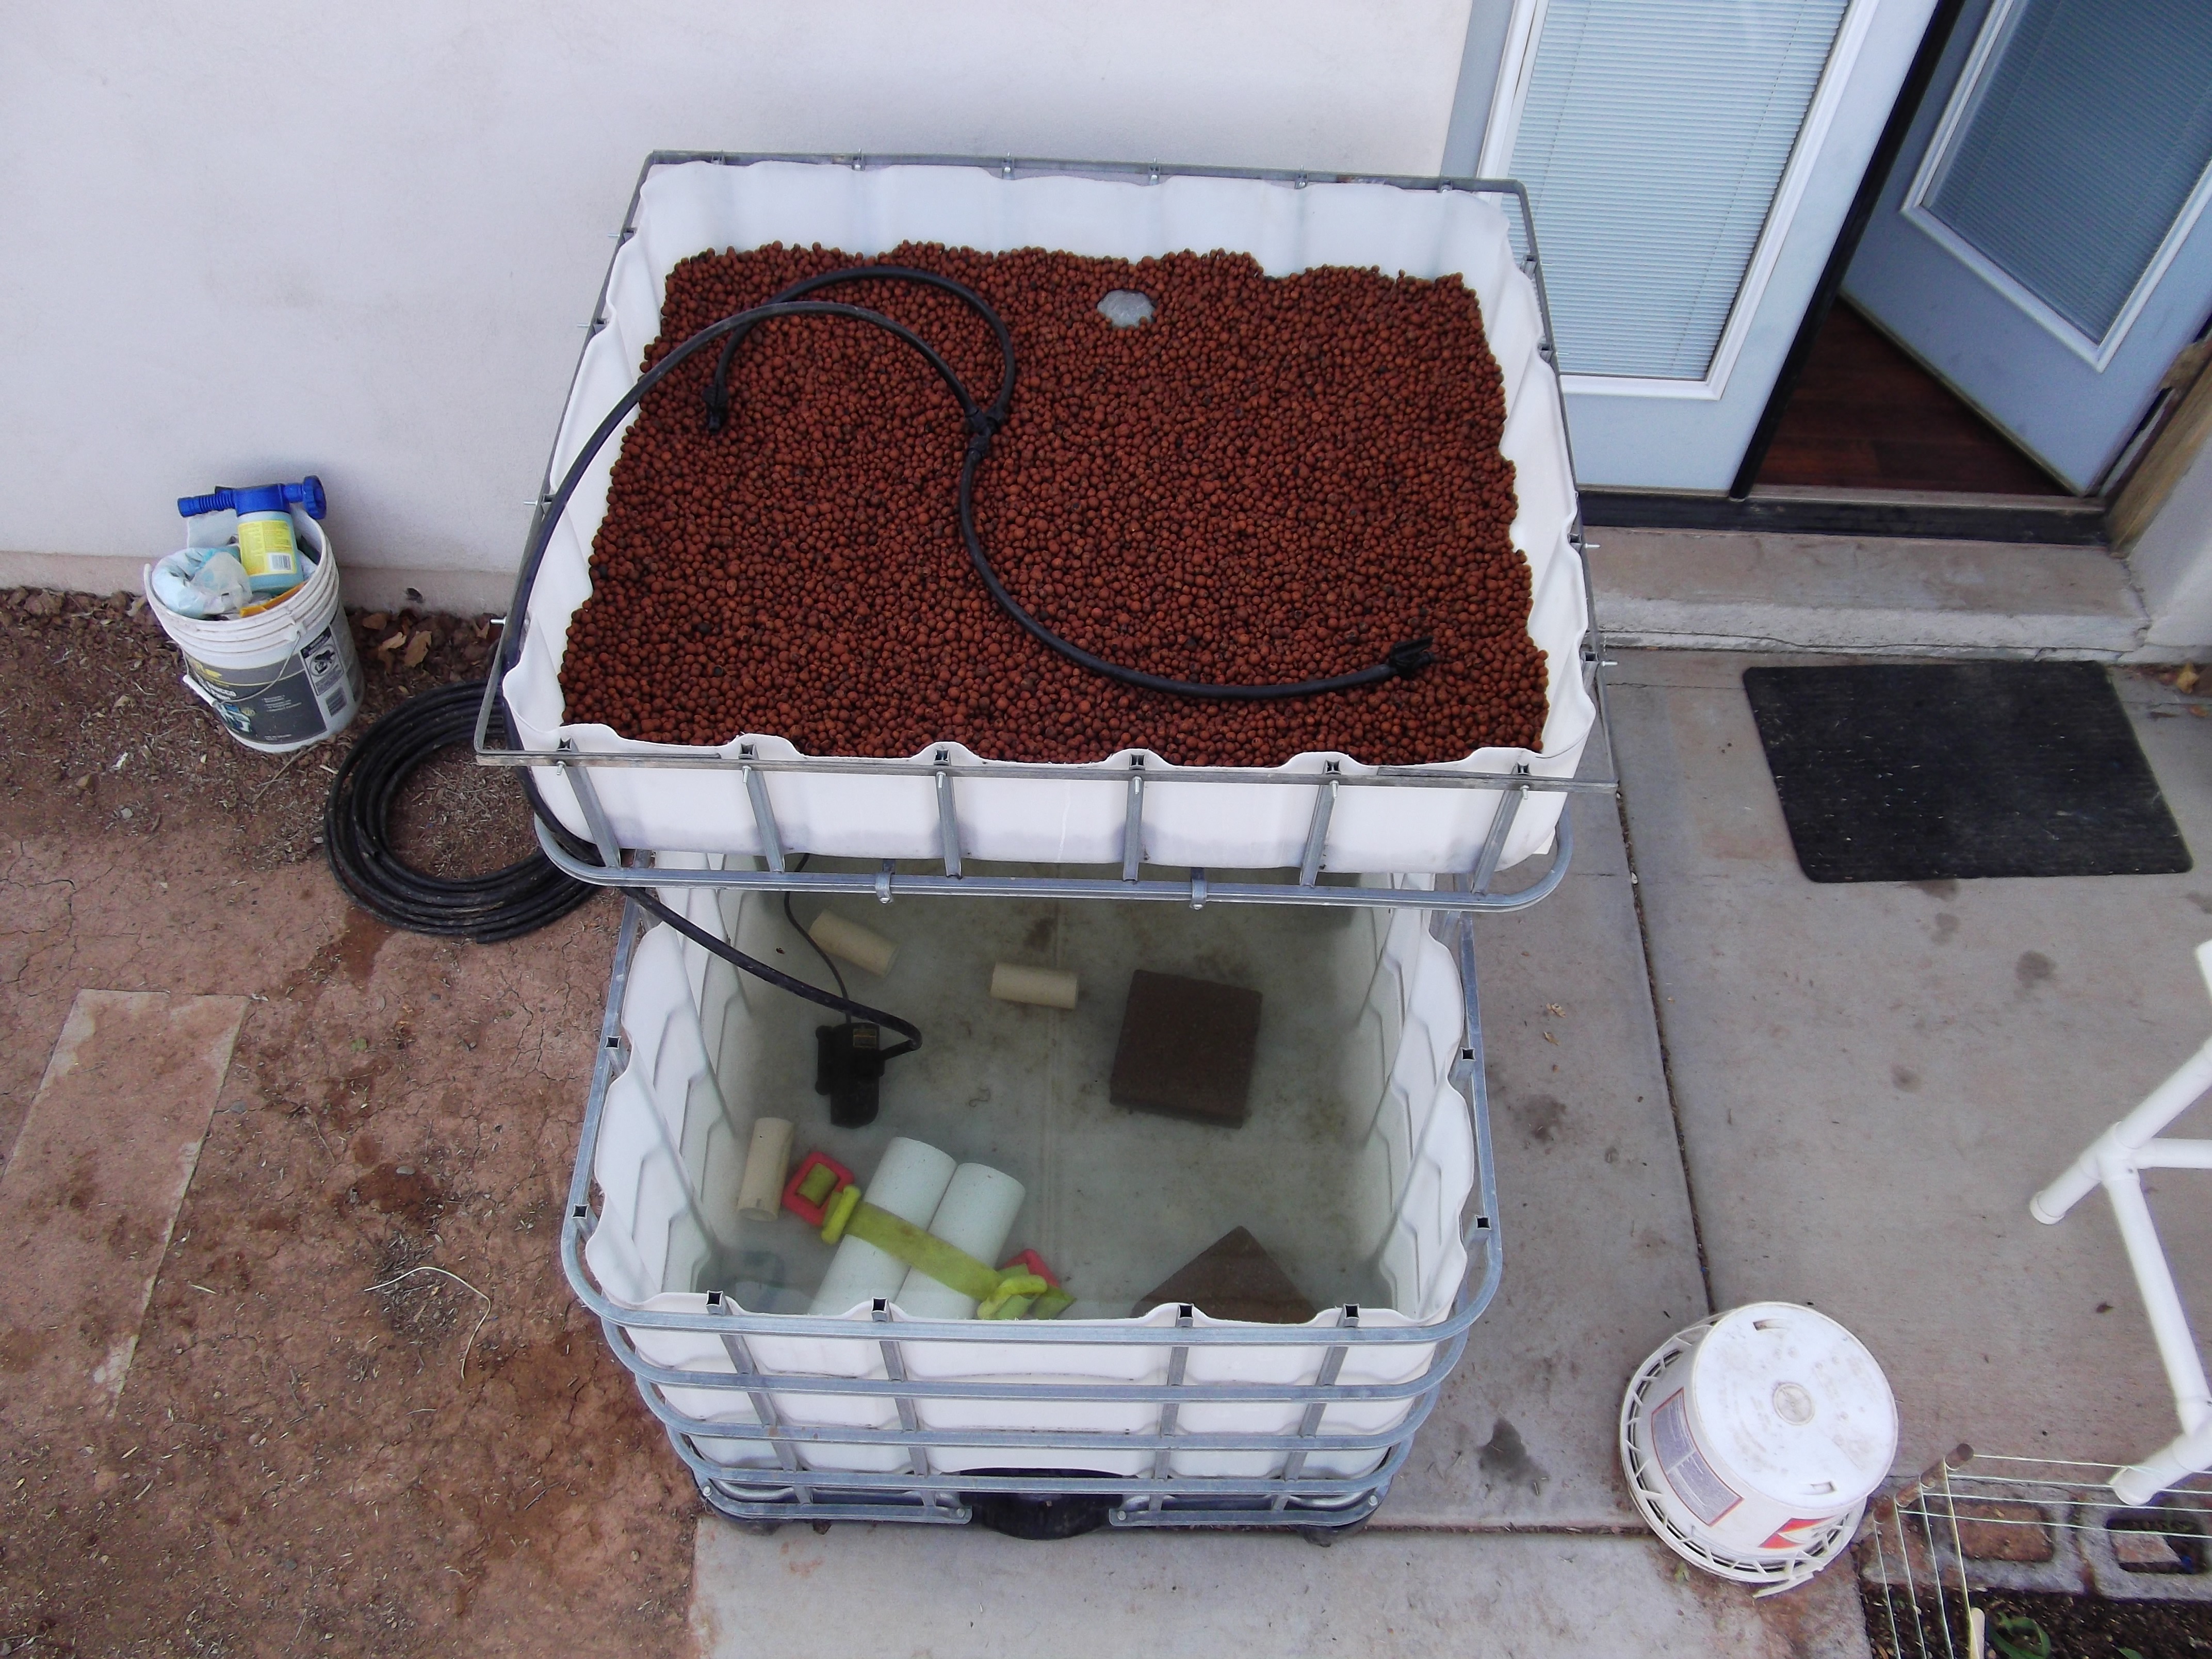 Images of our Aquaponics System The SupUrban Farm &amp; Garden